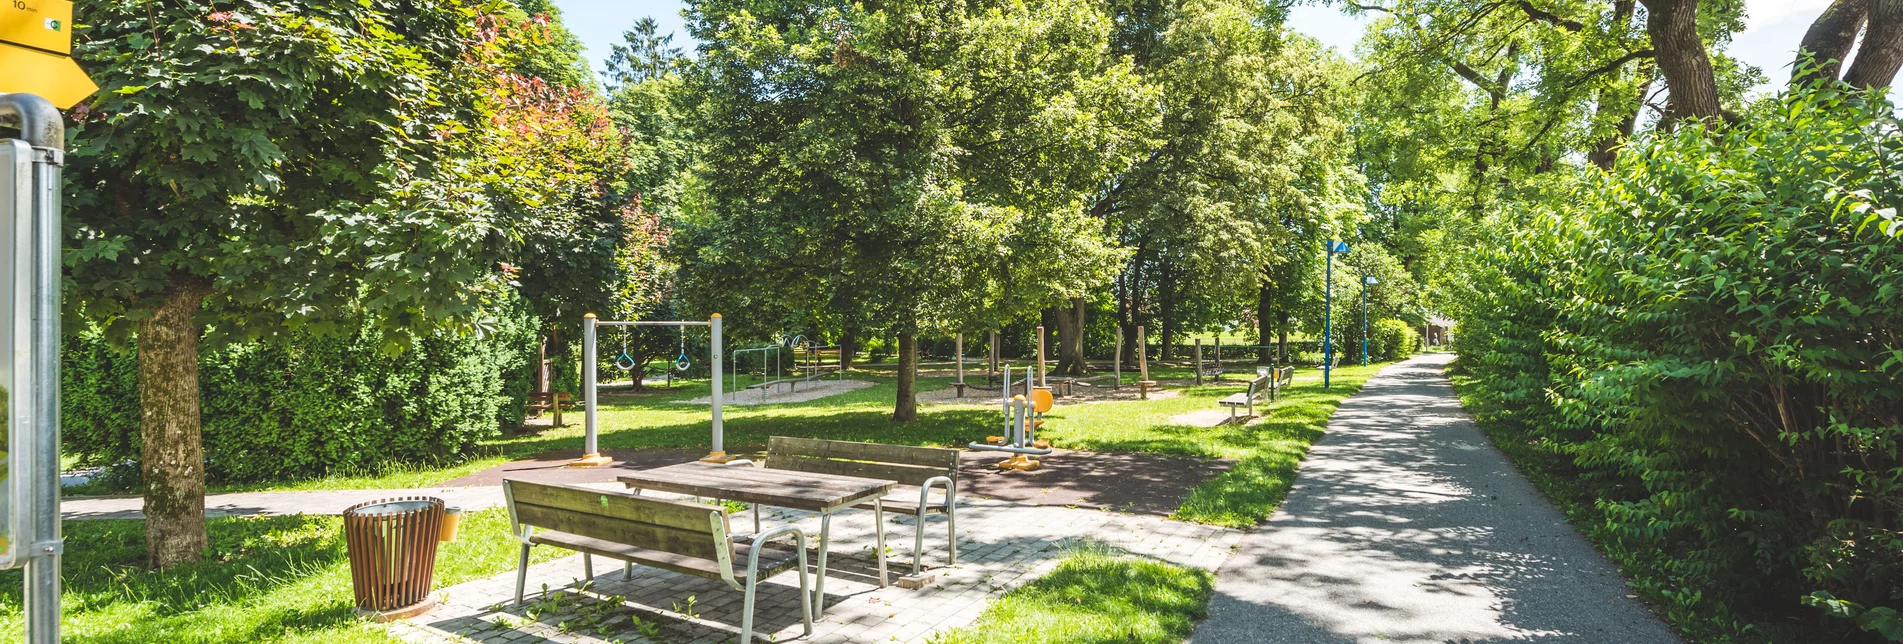 Cozy places in the city park | © TV Oststeiermark | Black Phoenix Positioning